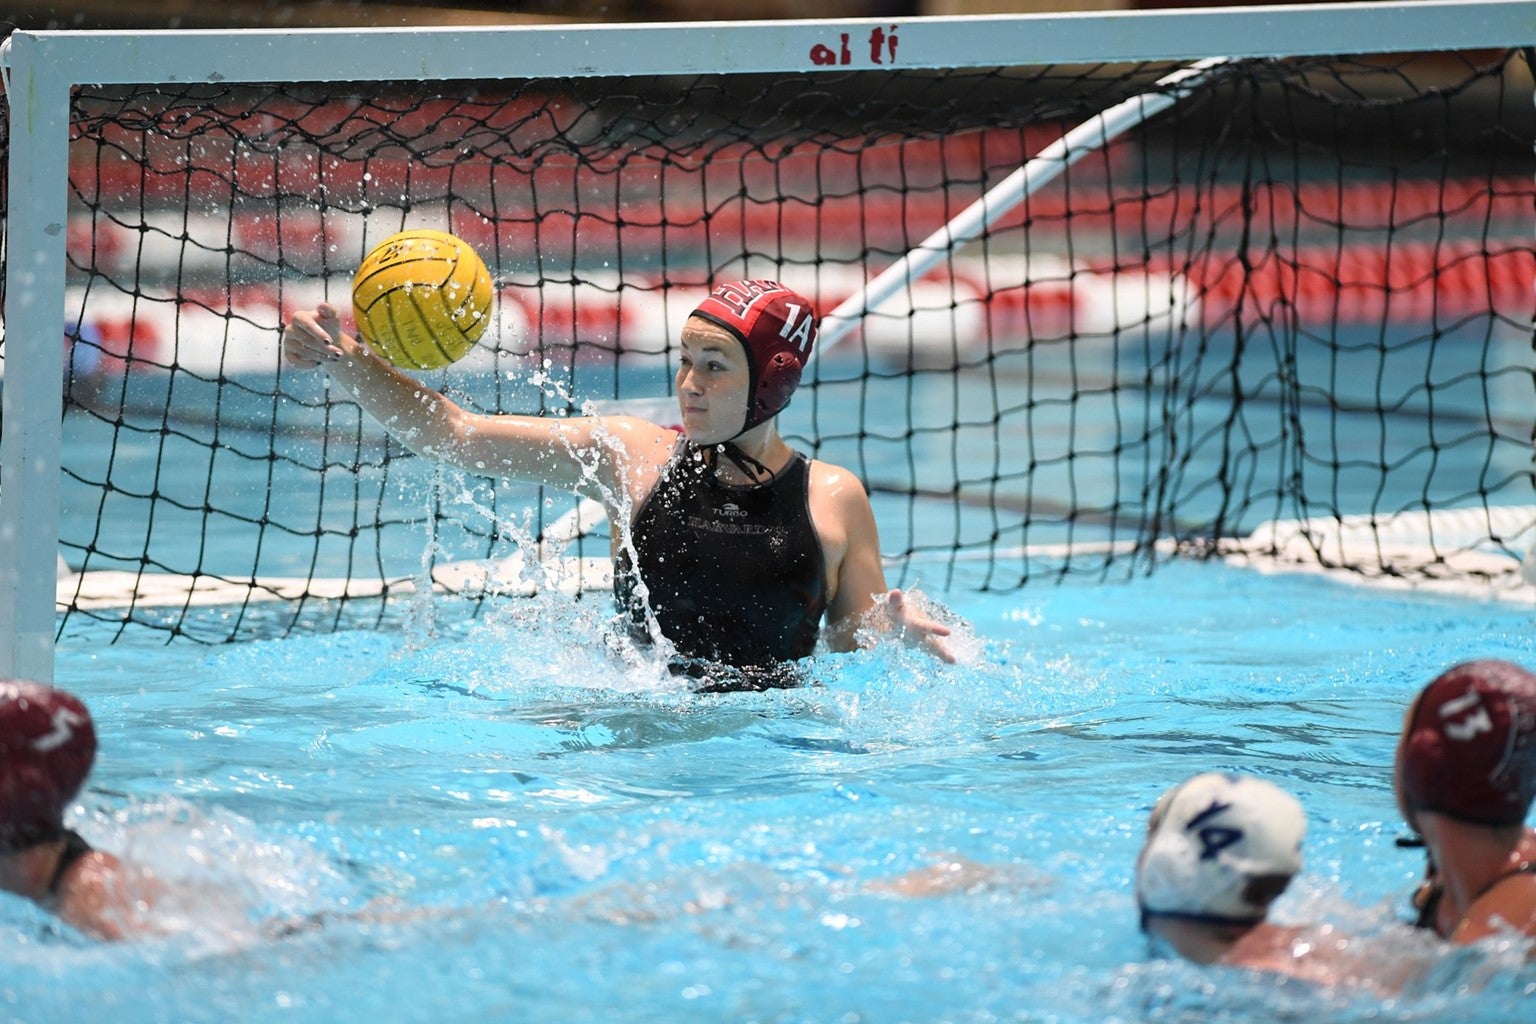 A water polo goalie catching the ball.